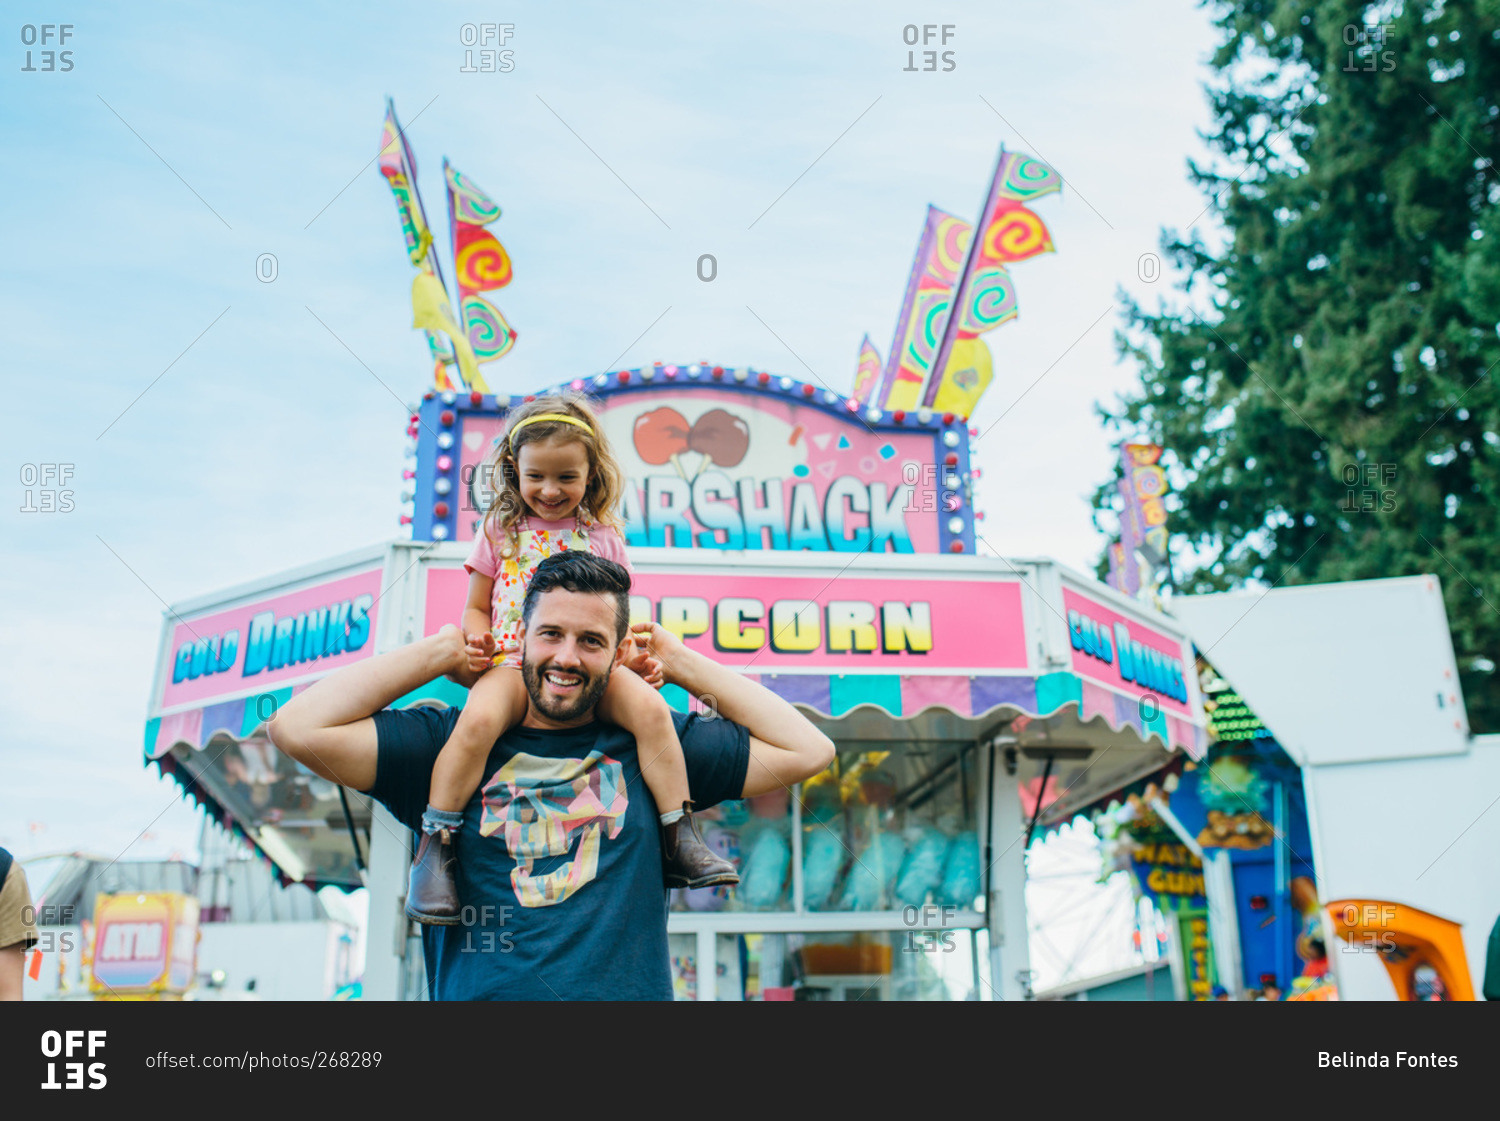 Girl riding on her dad's shoulders at a fair